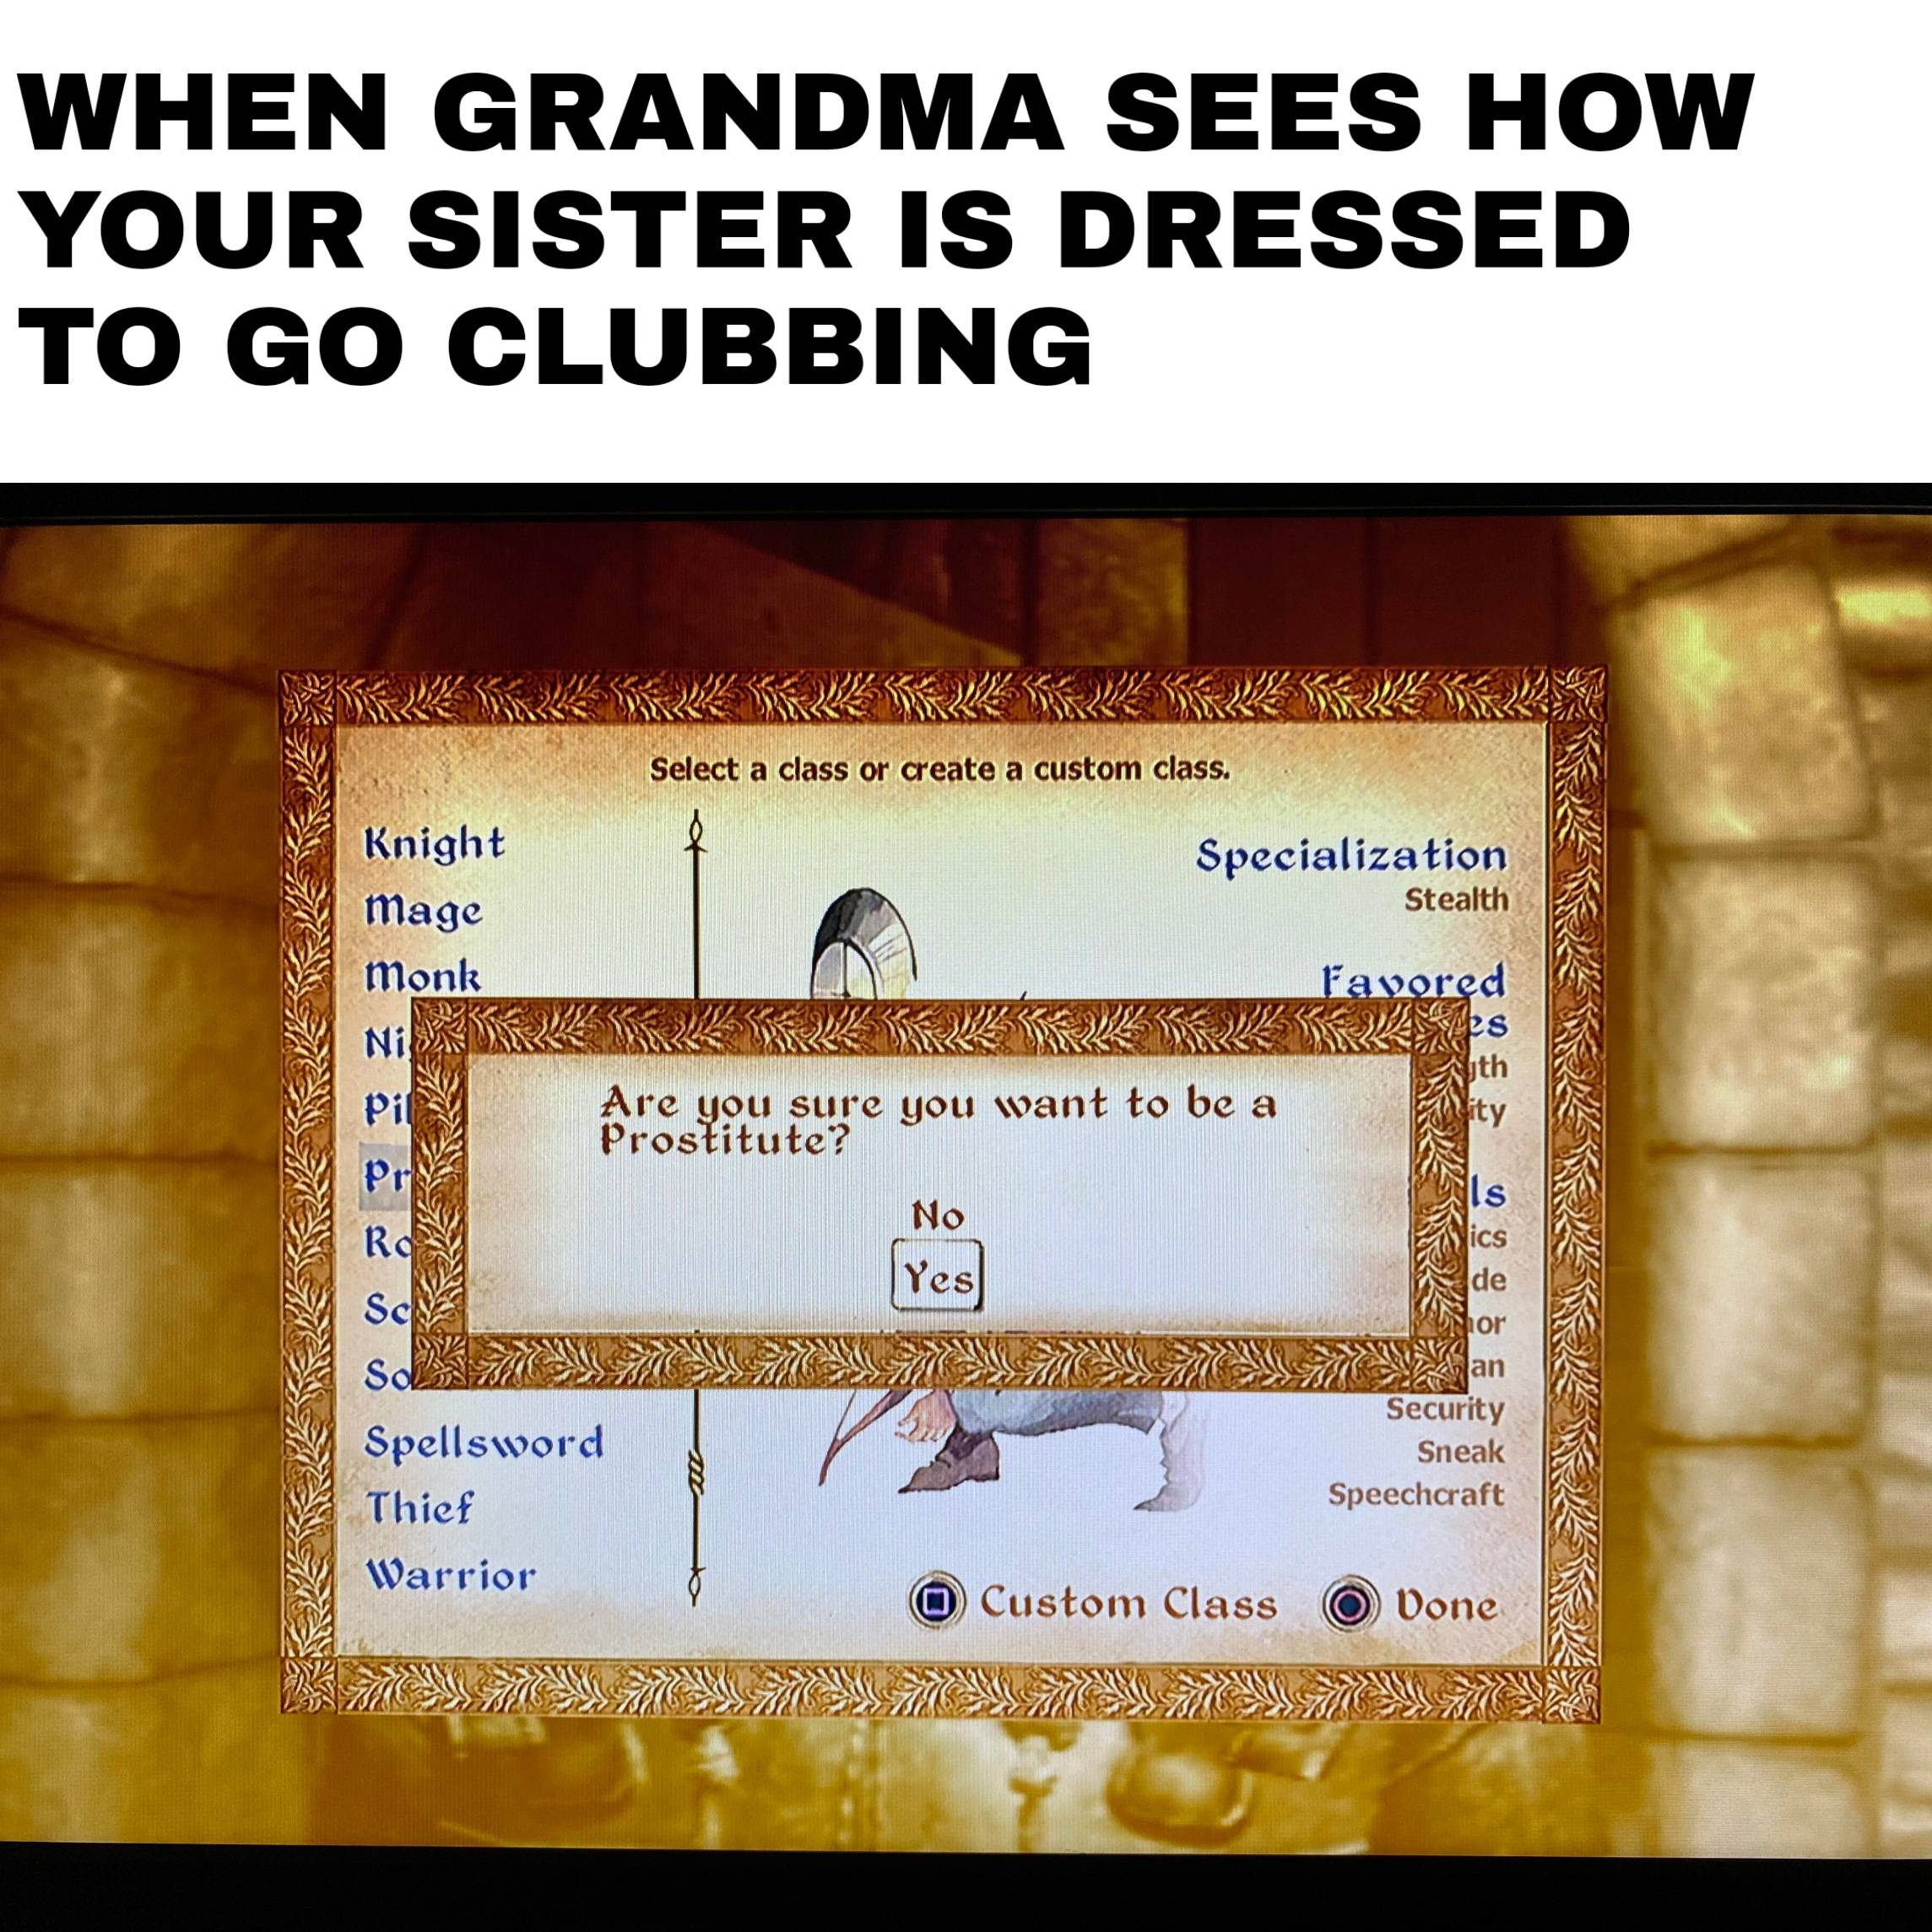 Dank,  Dank Memes Dank,  text: WHEN GRANDMA SEES HOW YOUR SISTER IS DRESSED TO GO CLUBBING Select a class or create a custom class. Knight mage monk Specialization Stealth Ace you Stti•e gou svant to be a Pi Prostitute? No Yes Spellssvorcl Warrior IS ics C de Security Sneak Speechcraft Custom Class (O) Done 